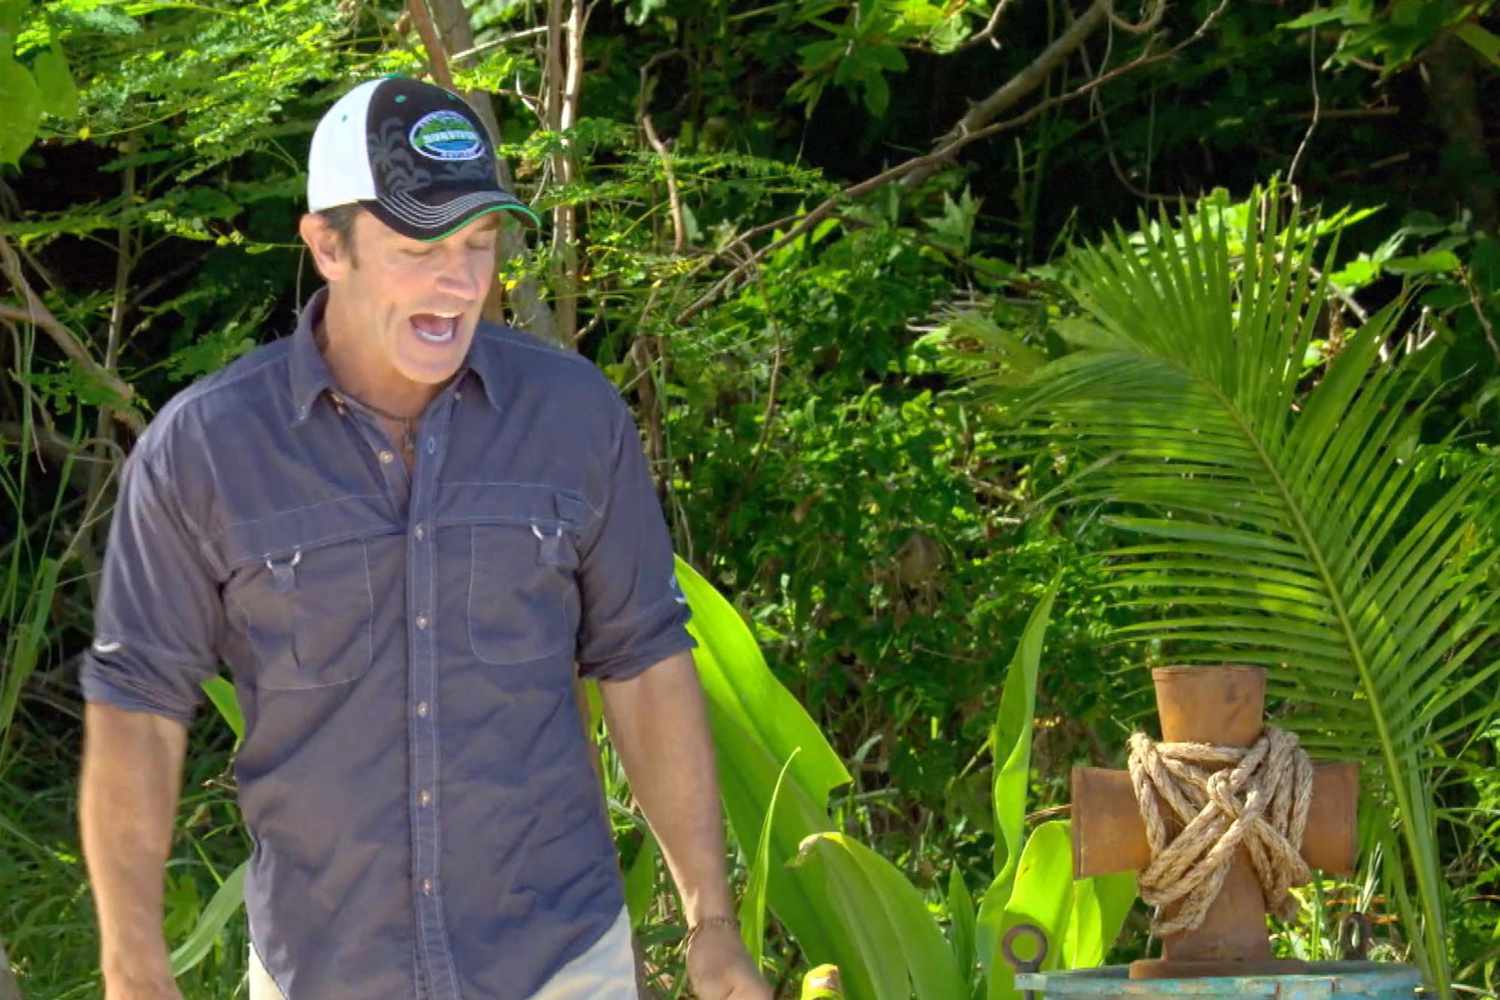 23. Jeff Probst Looks Down at His Feet When He Tells Players to 'Come On In, Guys!'